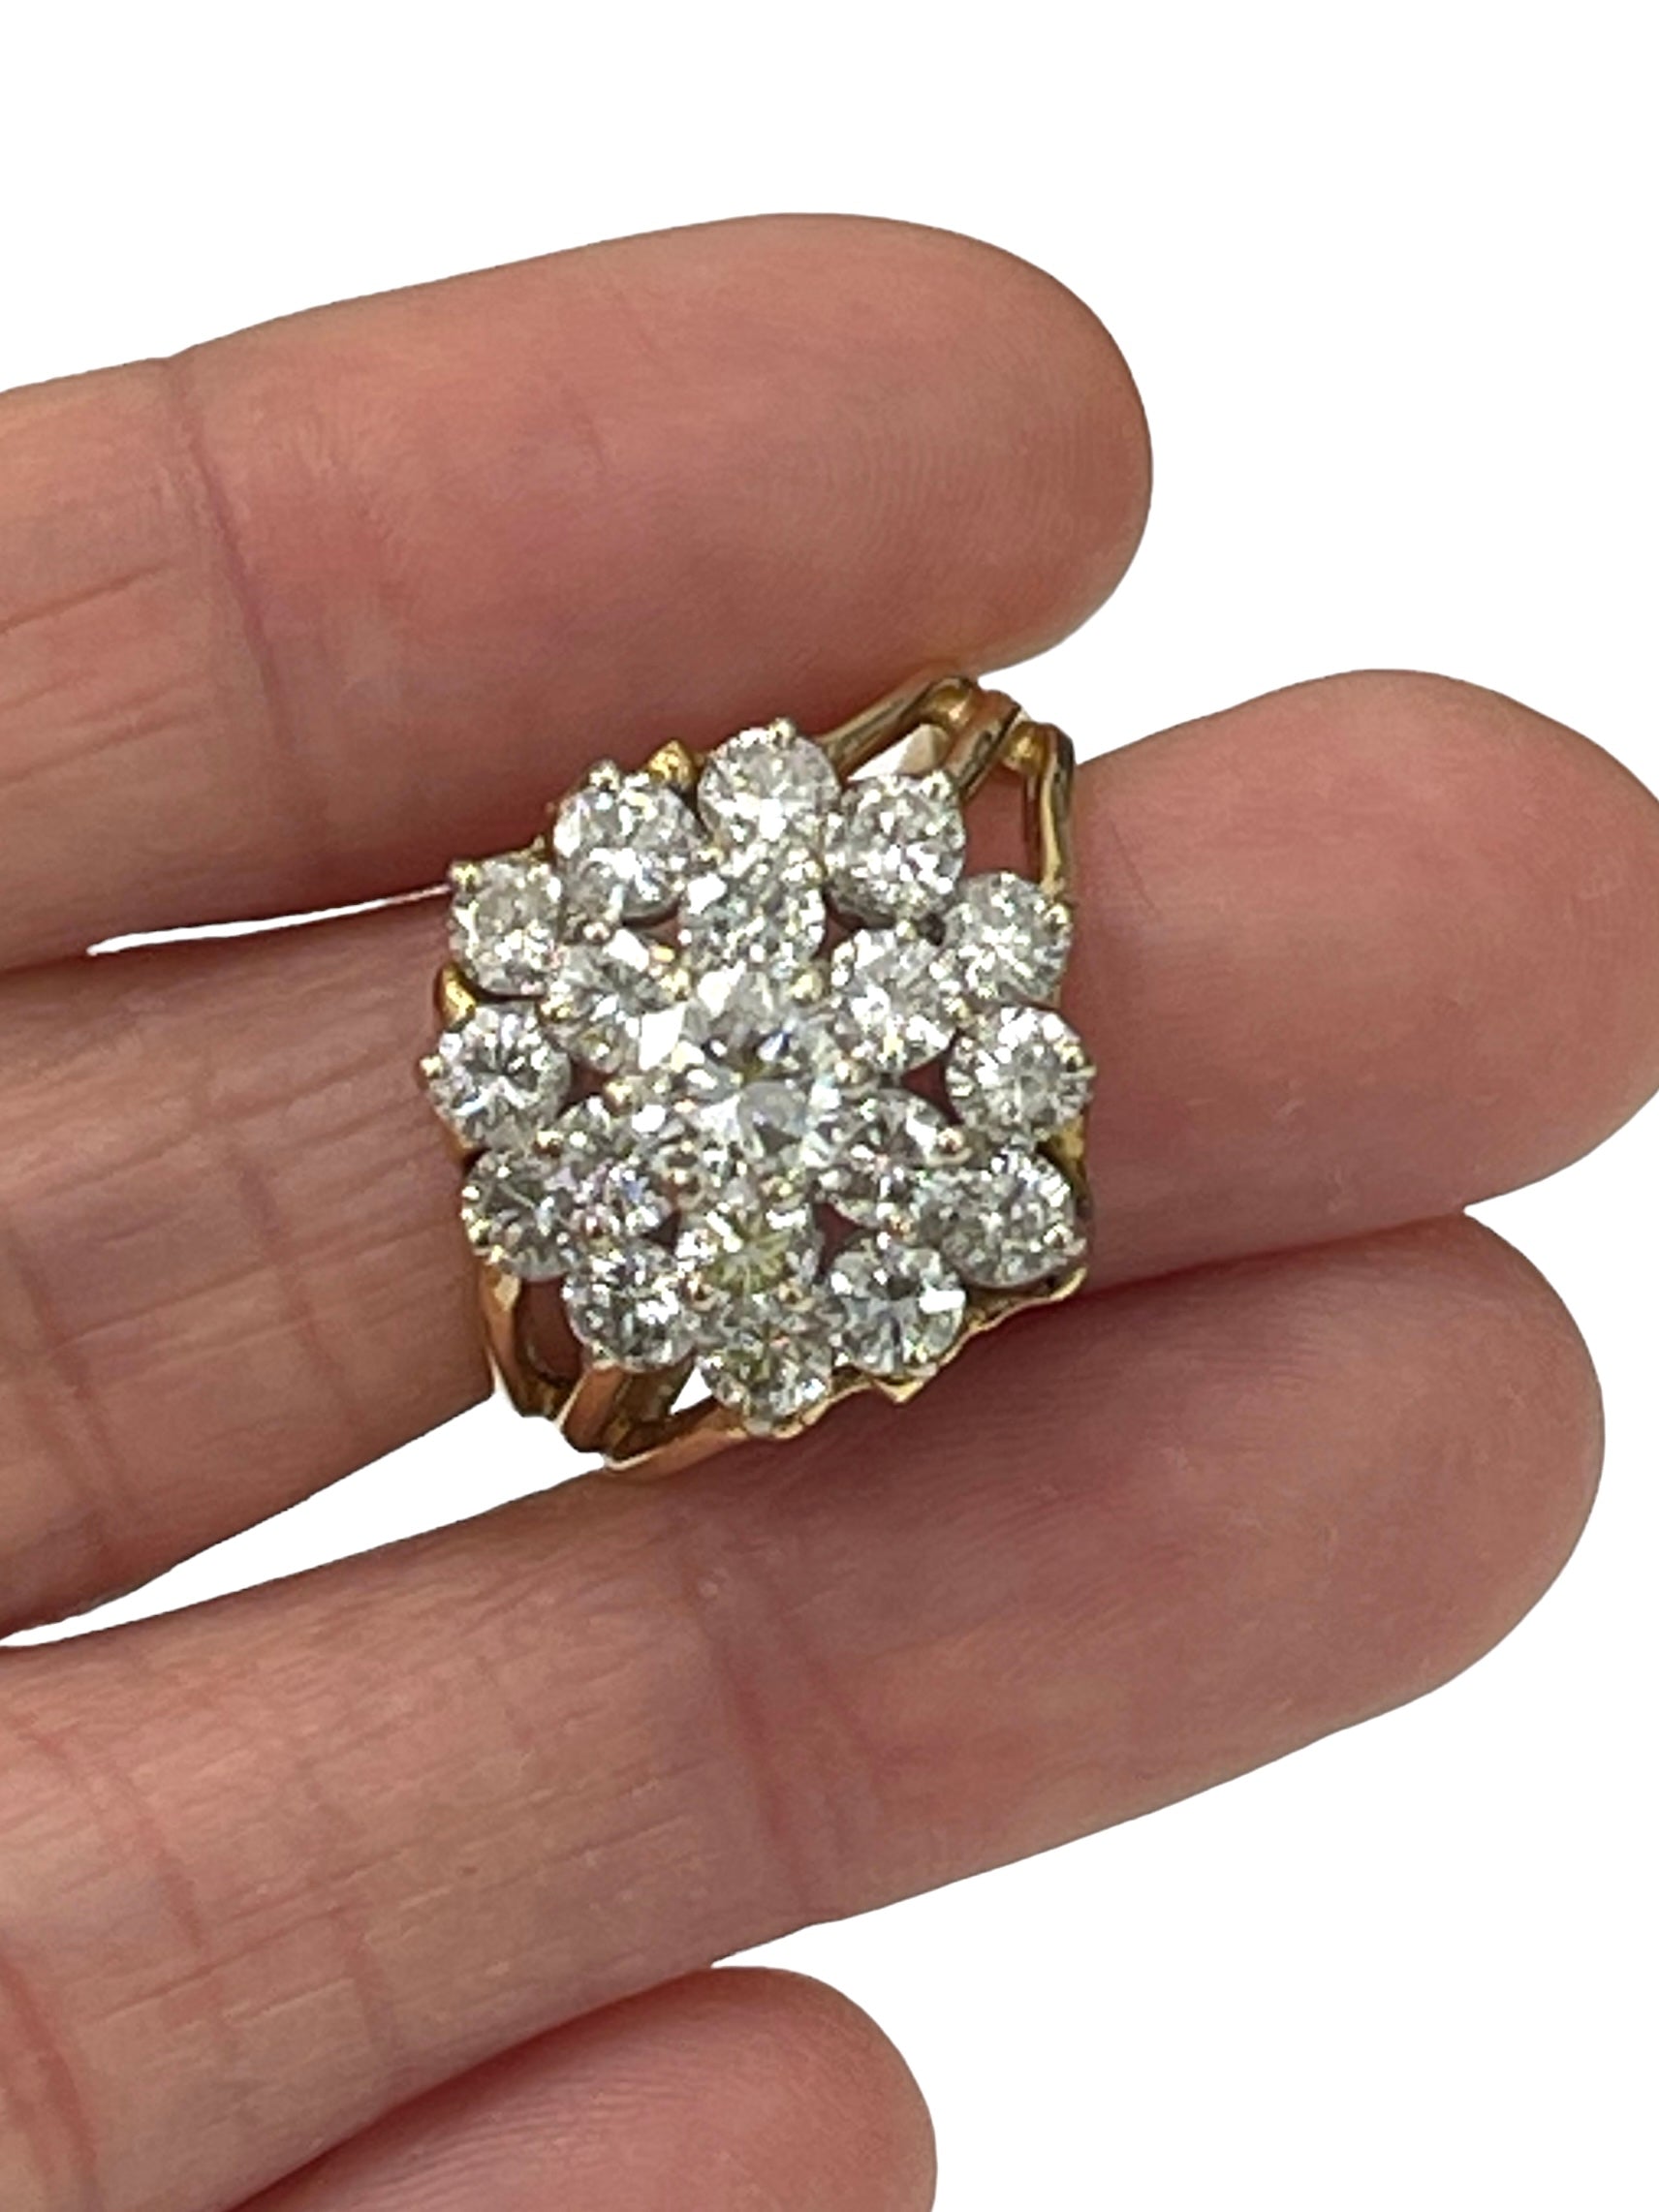 Round Brilliant Diamond Cluster Ring Yellow Gold 14kt